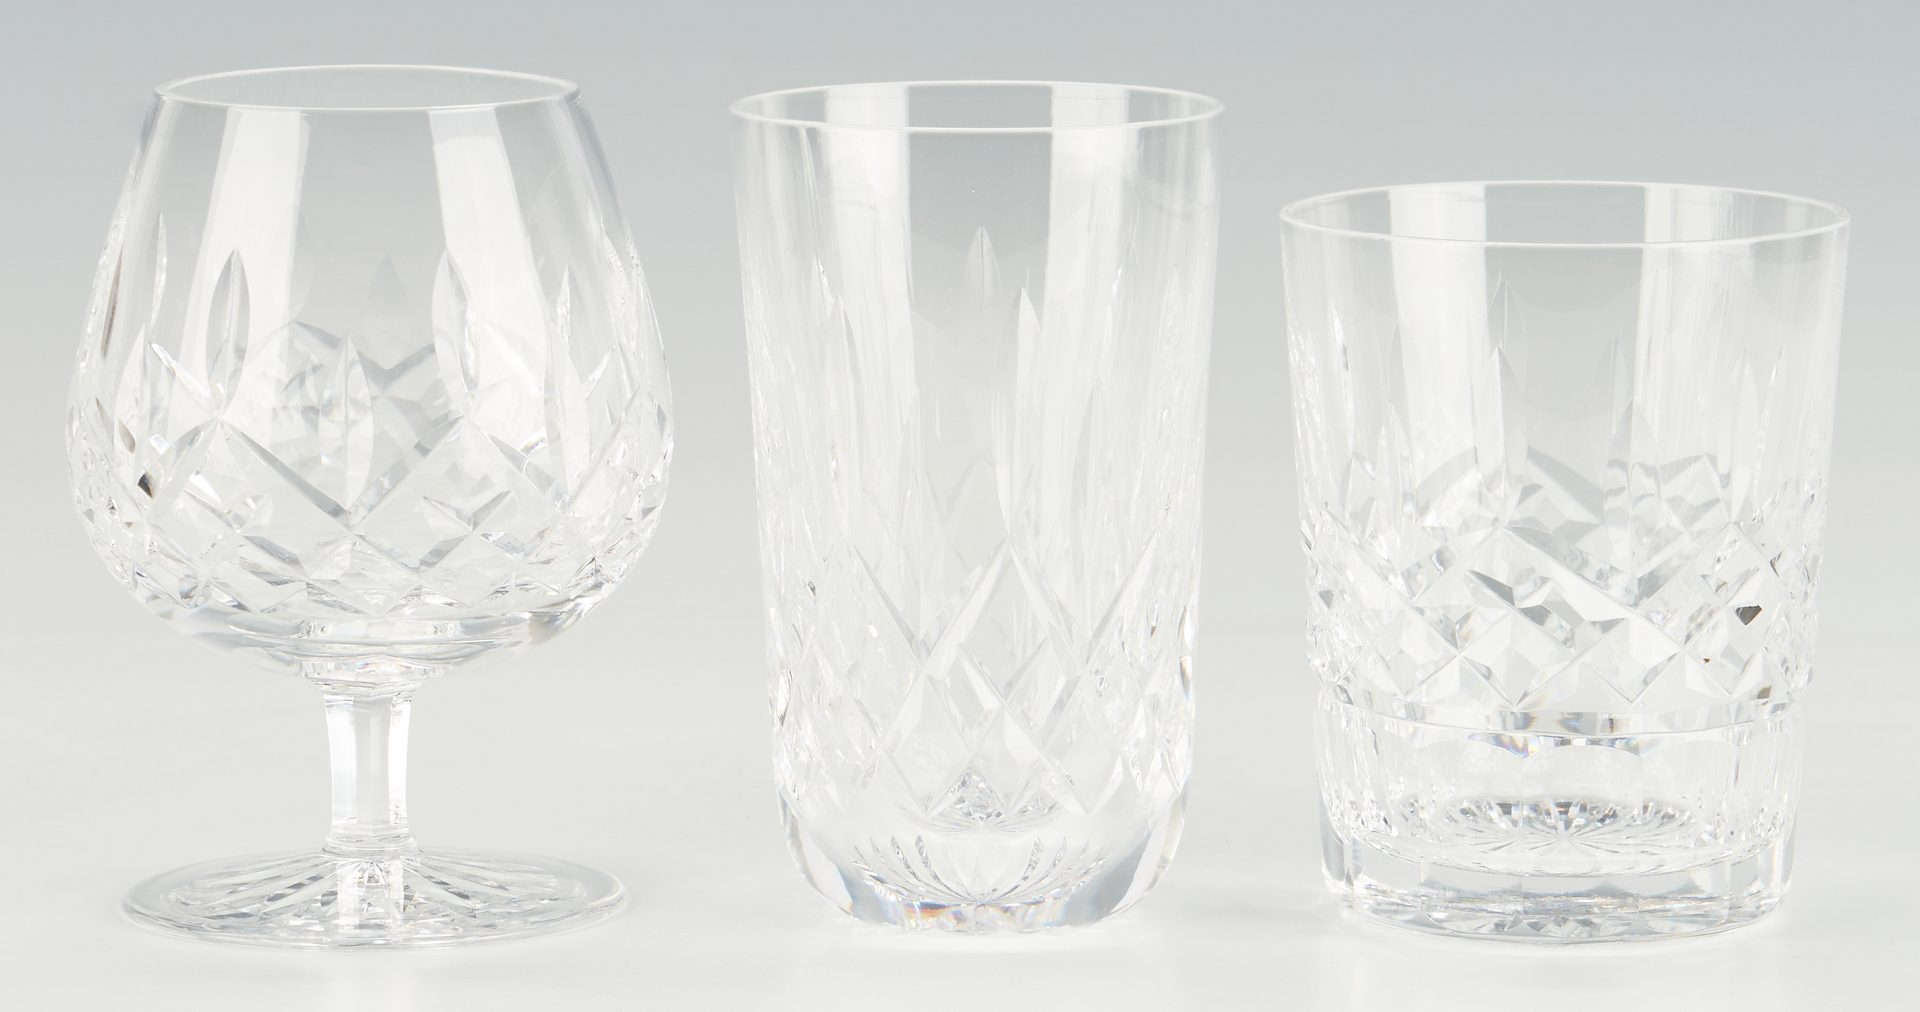 Lot 962: 22 Pcs. Waterford Crystal, incl. Drinkware & Novelty Items